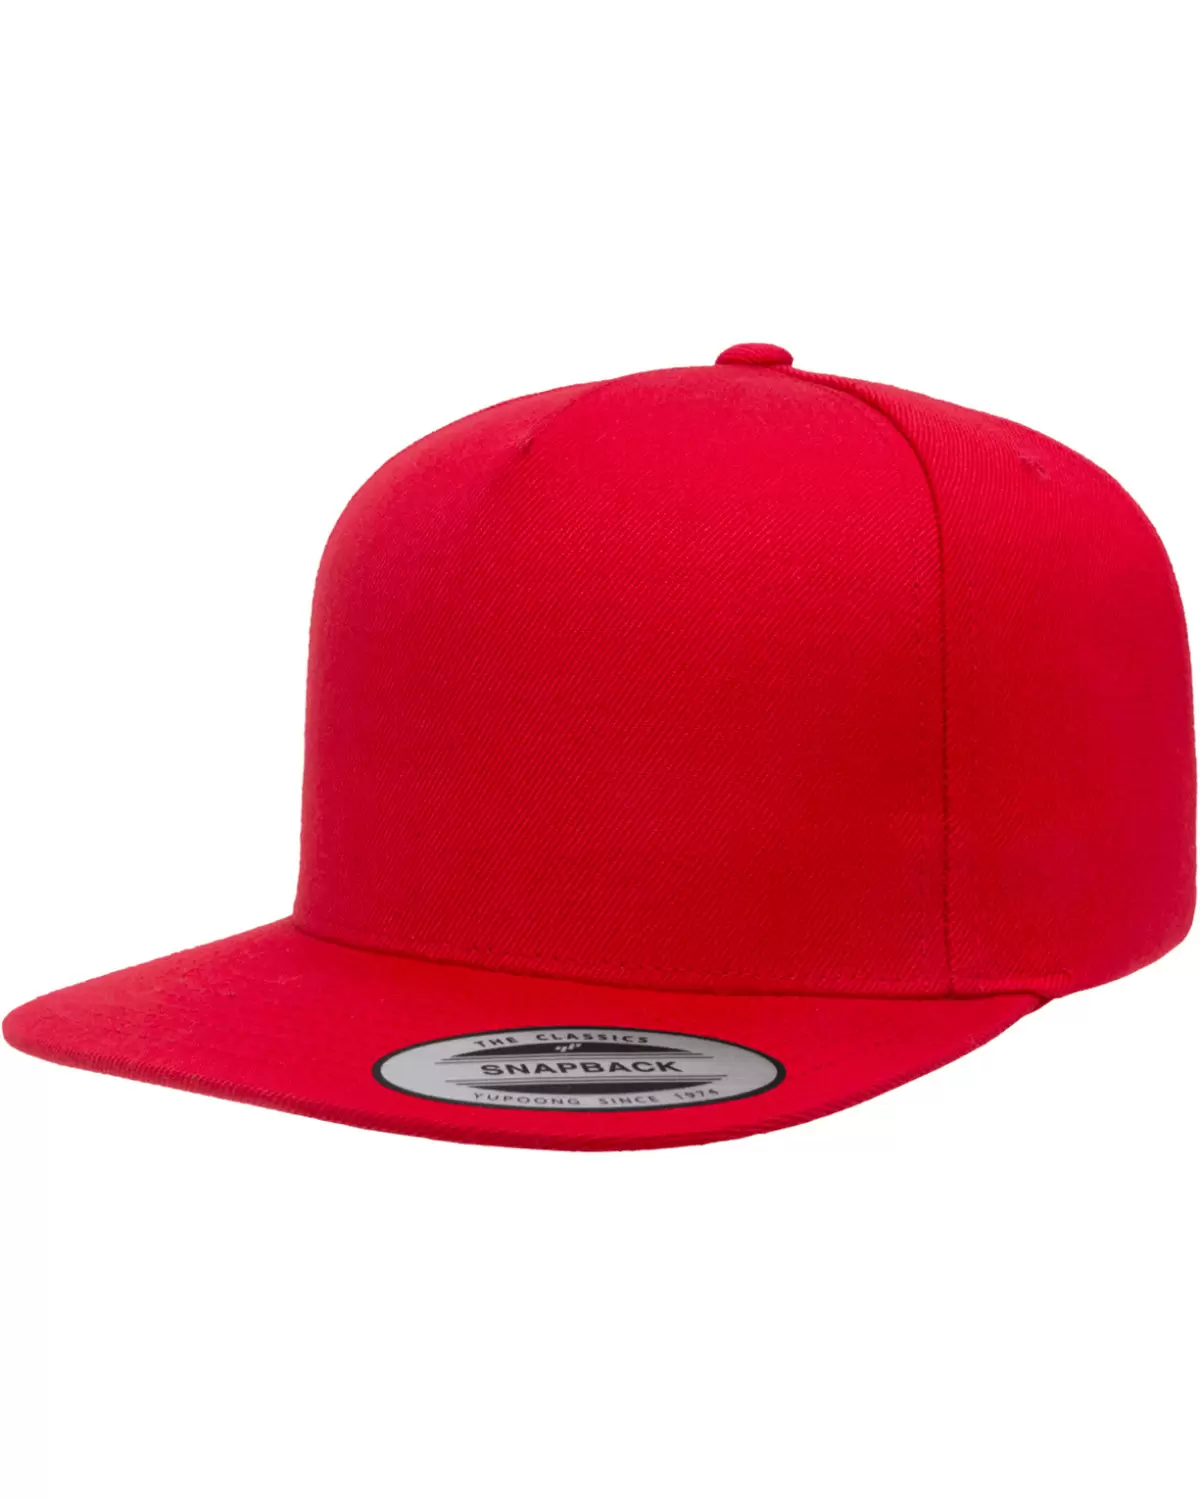 Yupoong 5089M Five Panel Wool Blend Snapback - From